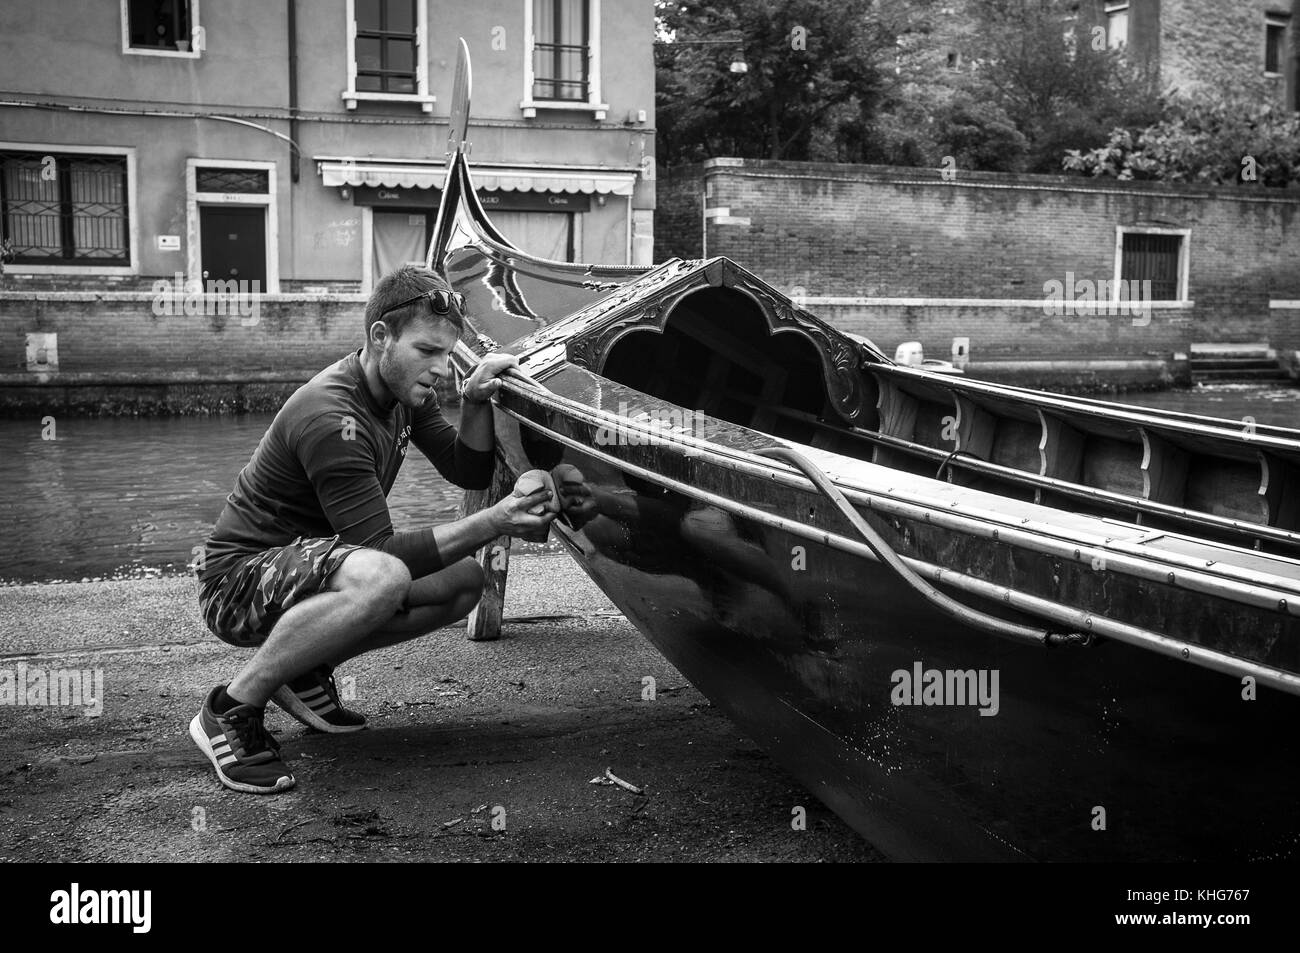 Cleaning a gondola and drying it before the days work Shot in a gondola boat yard, Black and white photo reportage Stock Photo